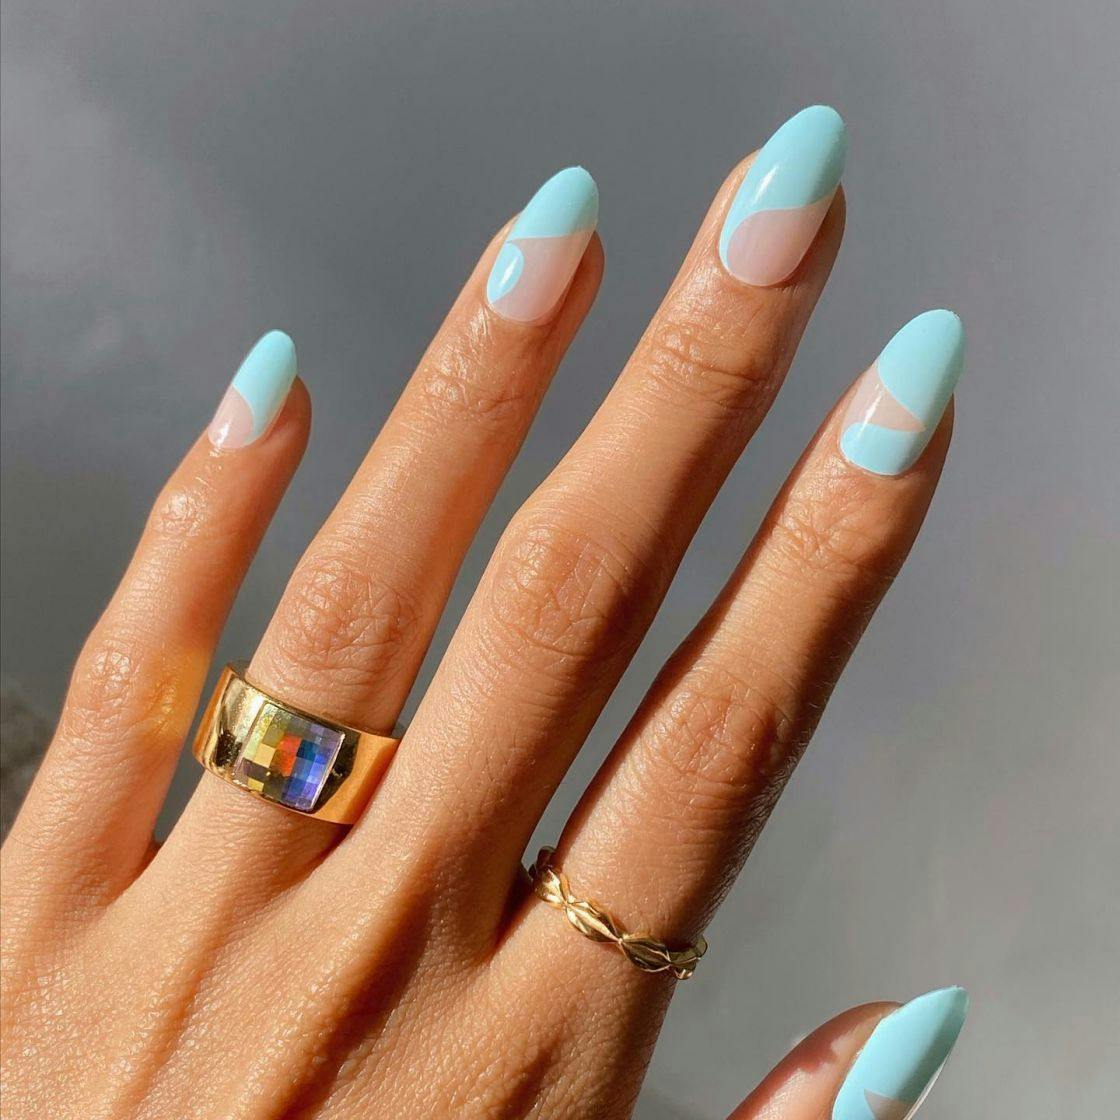 Blue nail trends: 19 of the best blue manicure ideas